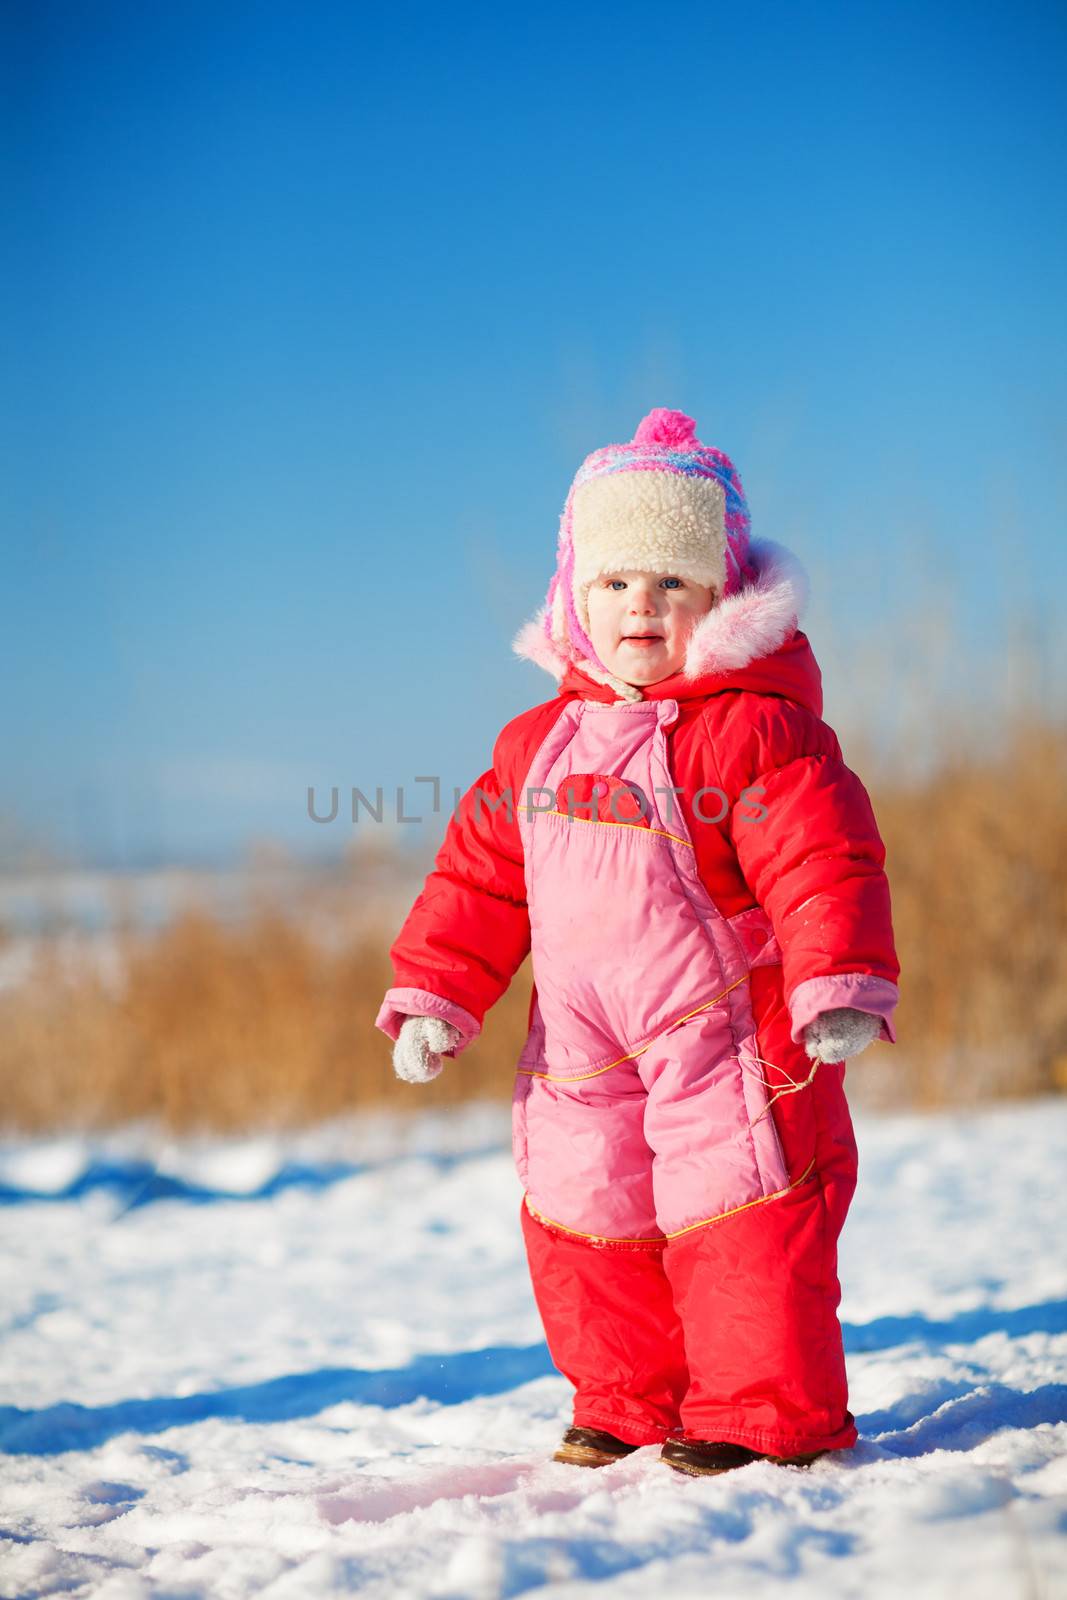 child in winter outdoors by vsurkov